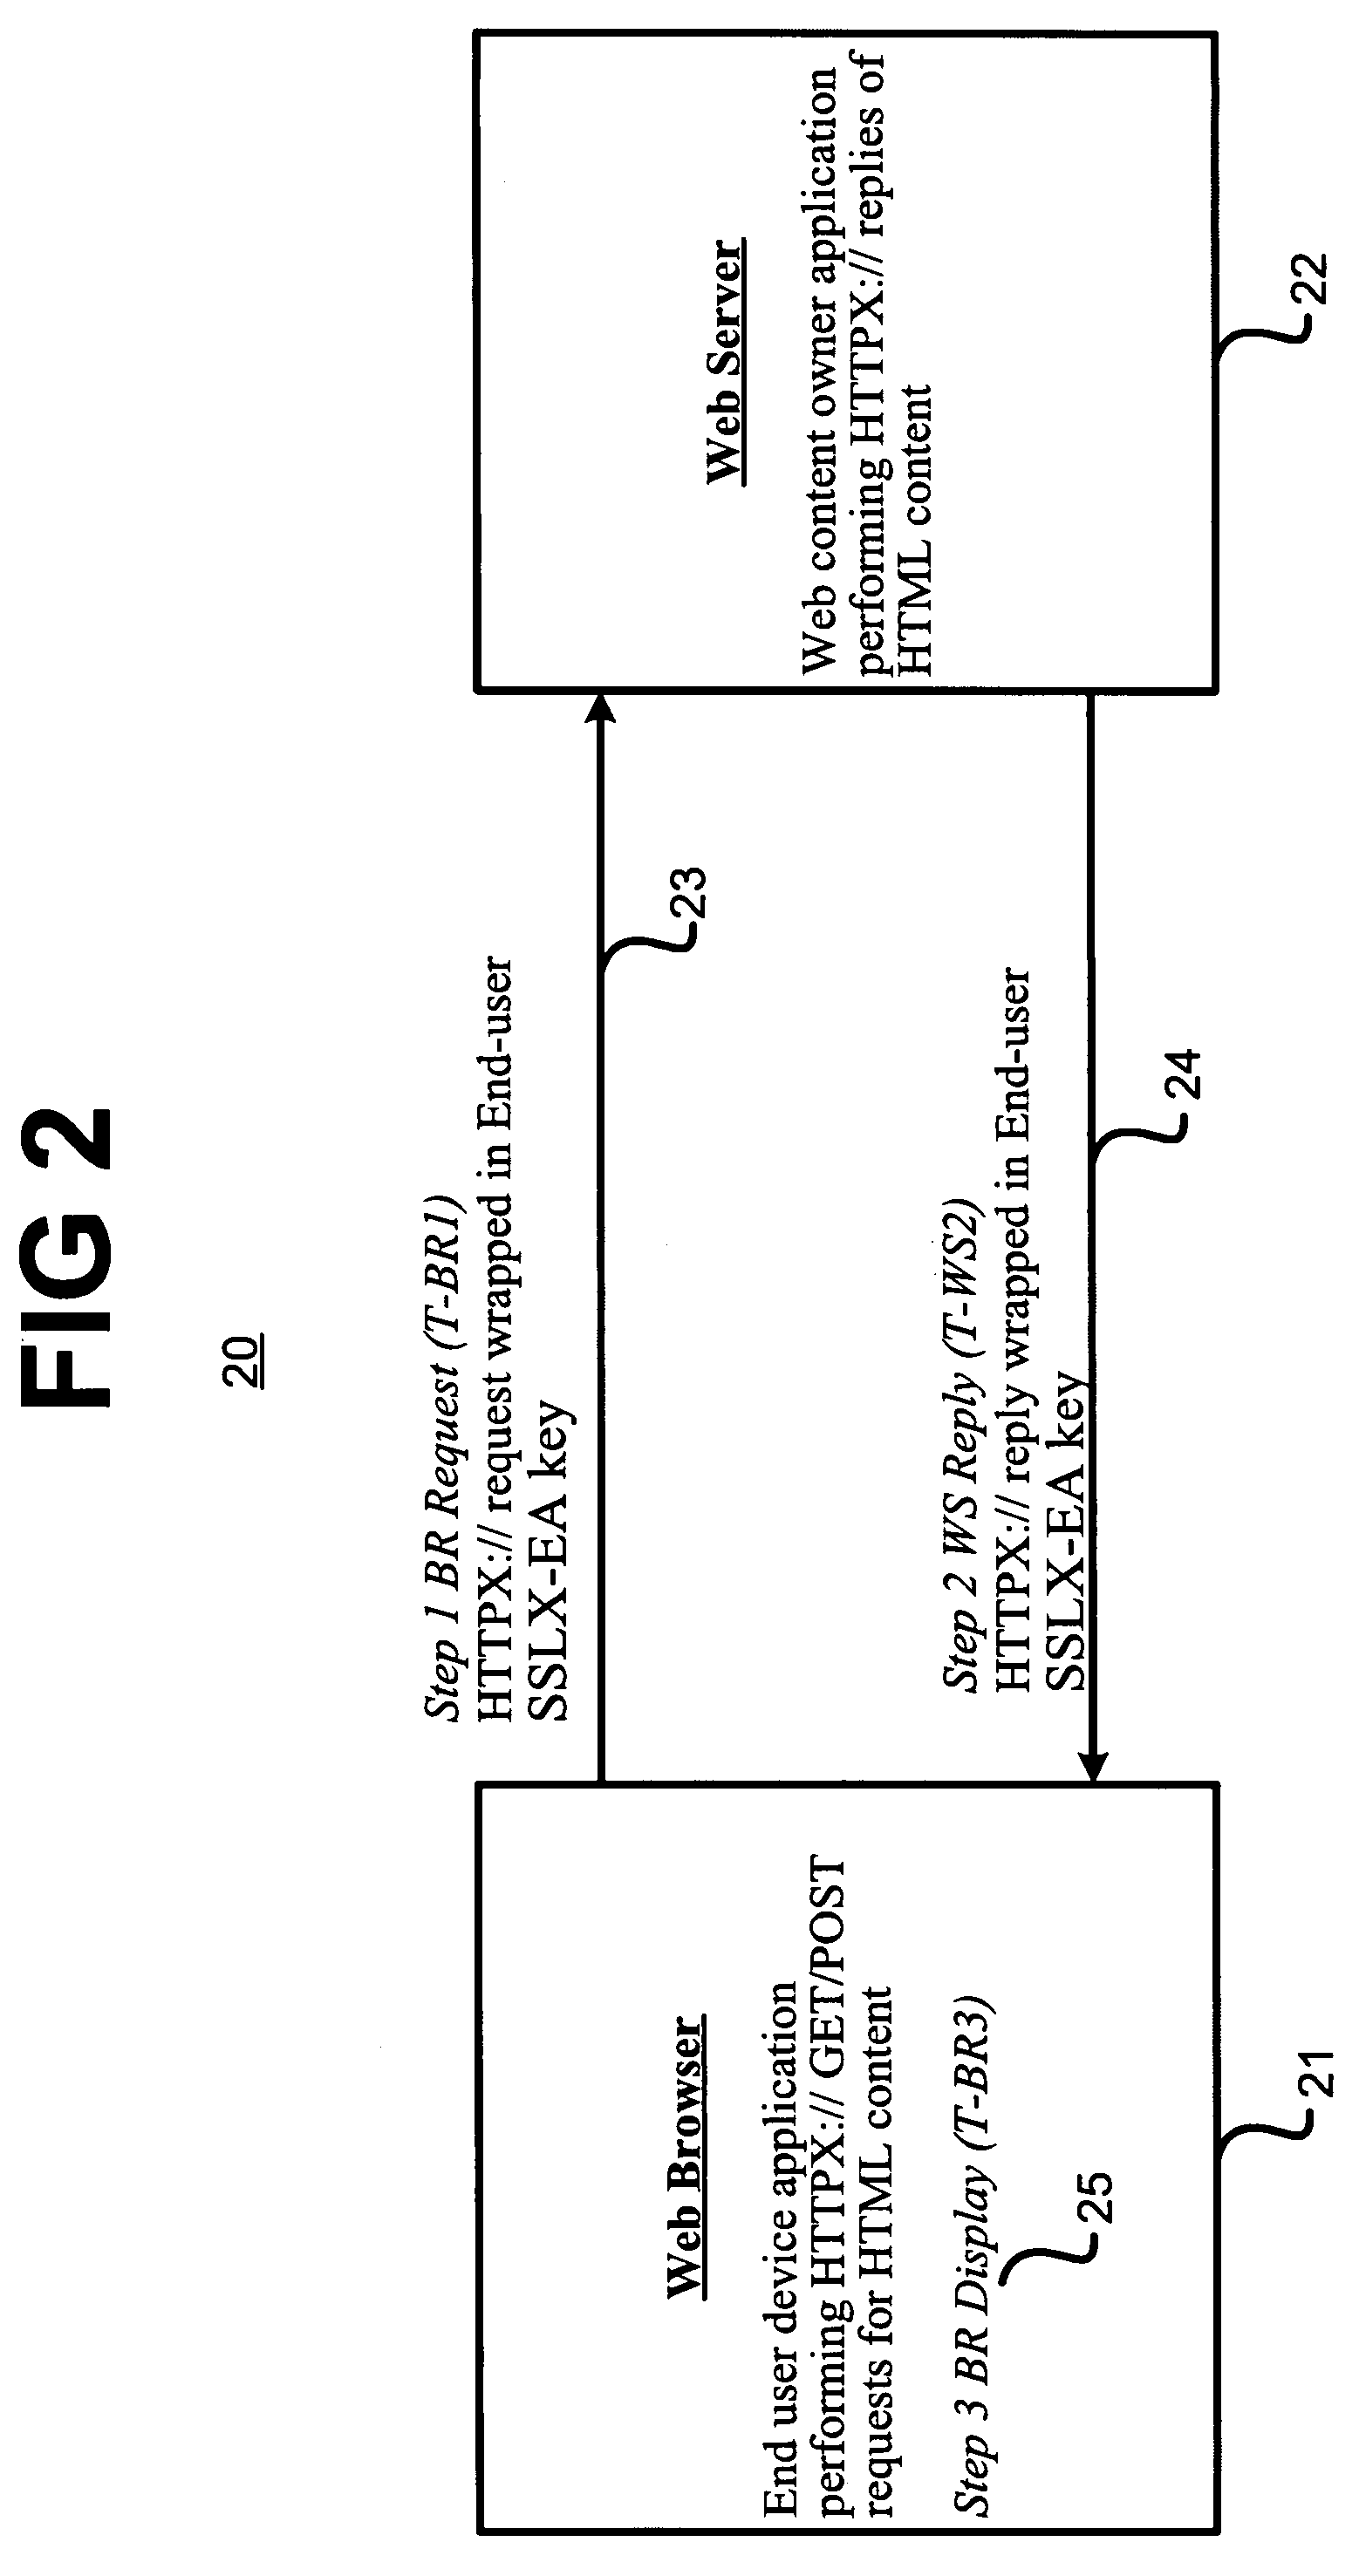 Method for obtaining key for use in secure communications over a network and apparatus for providing same